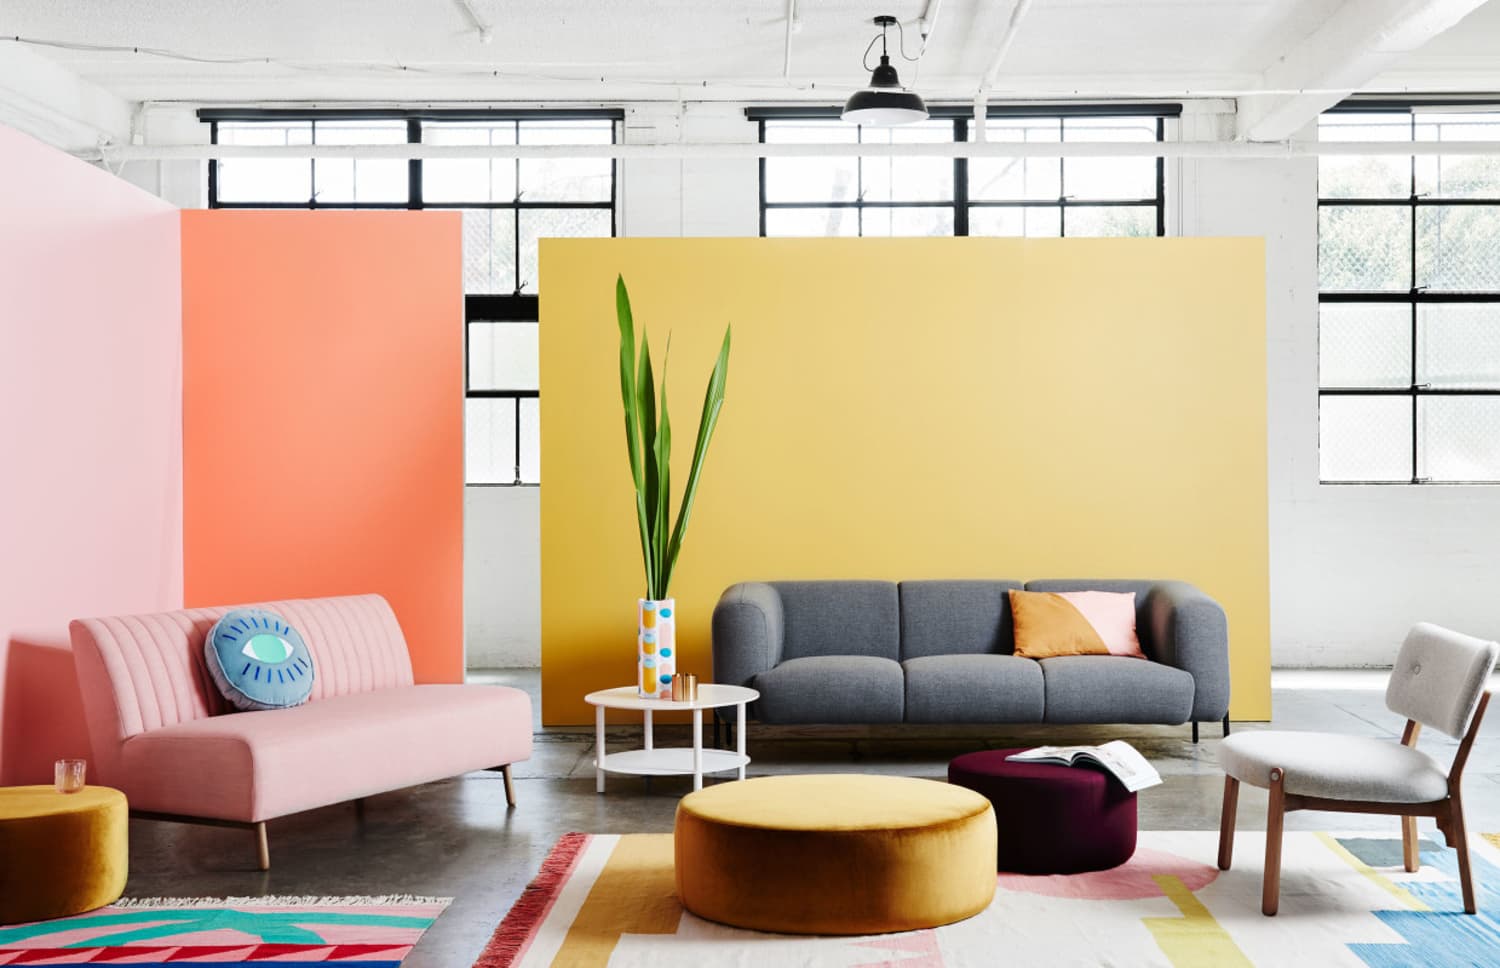 16 OTHER Online Design Stores You Definitely Want to Know About